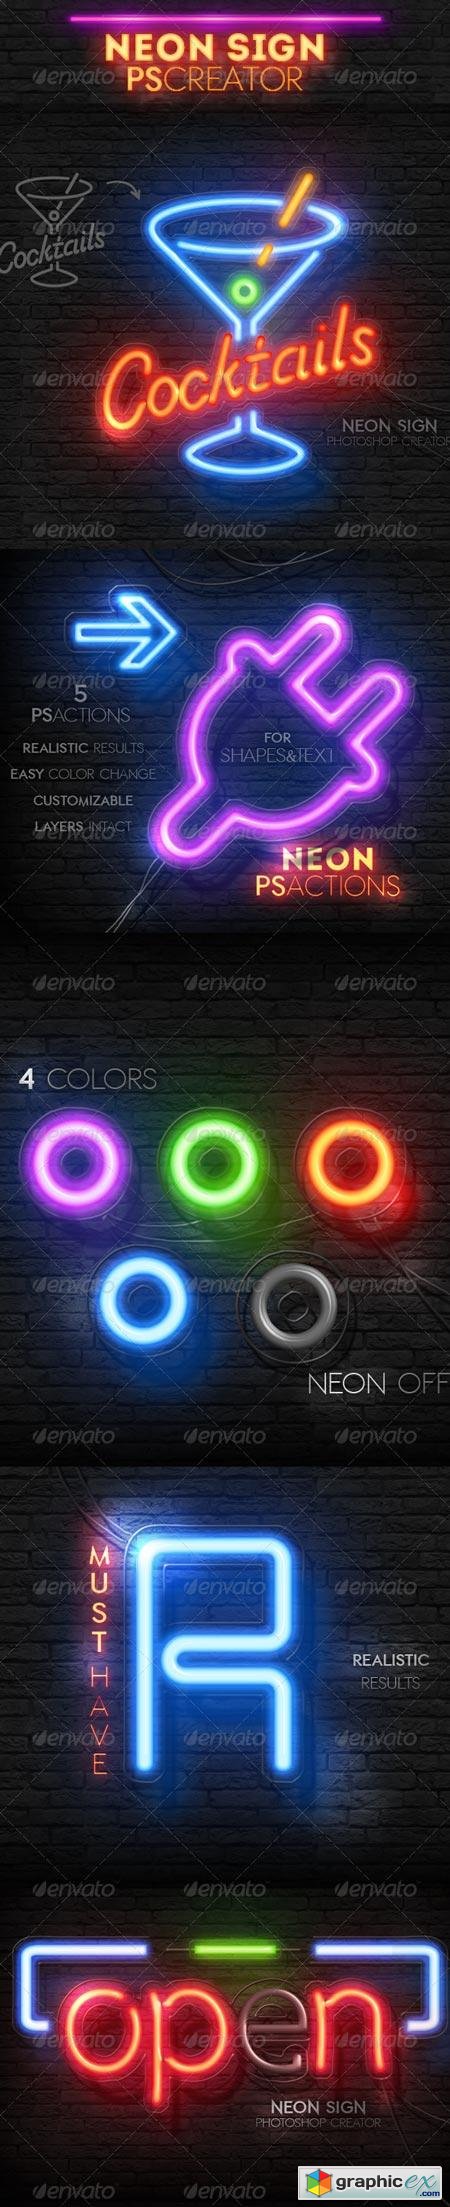 Neon Light Sign Photoshop Actions 8657469